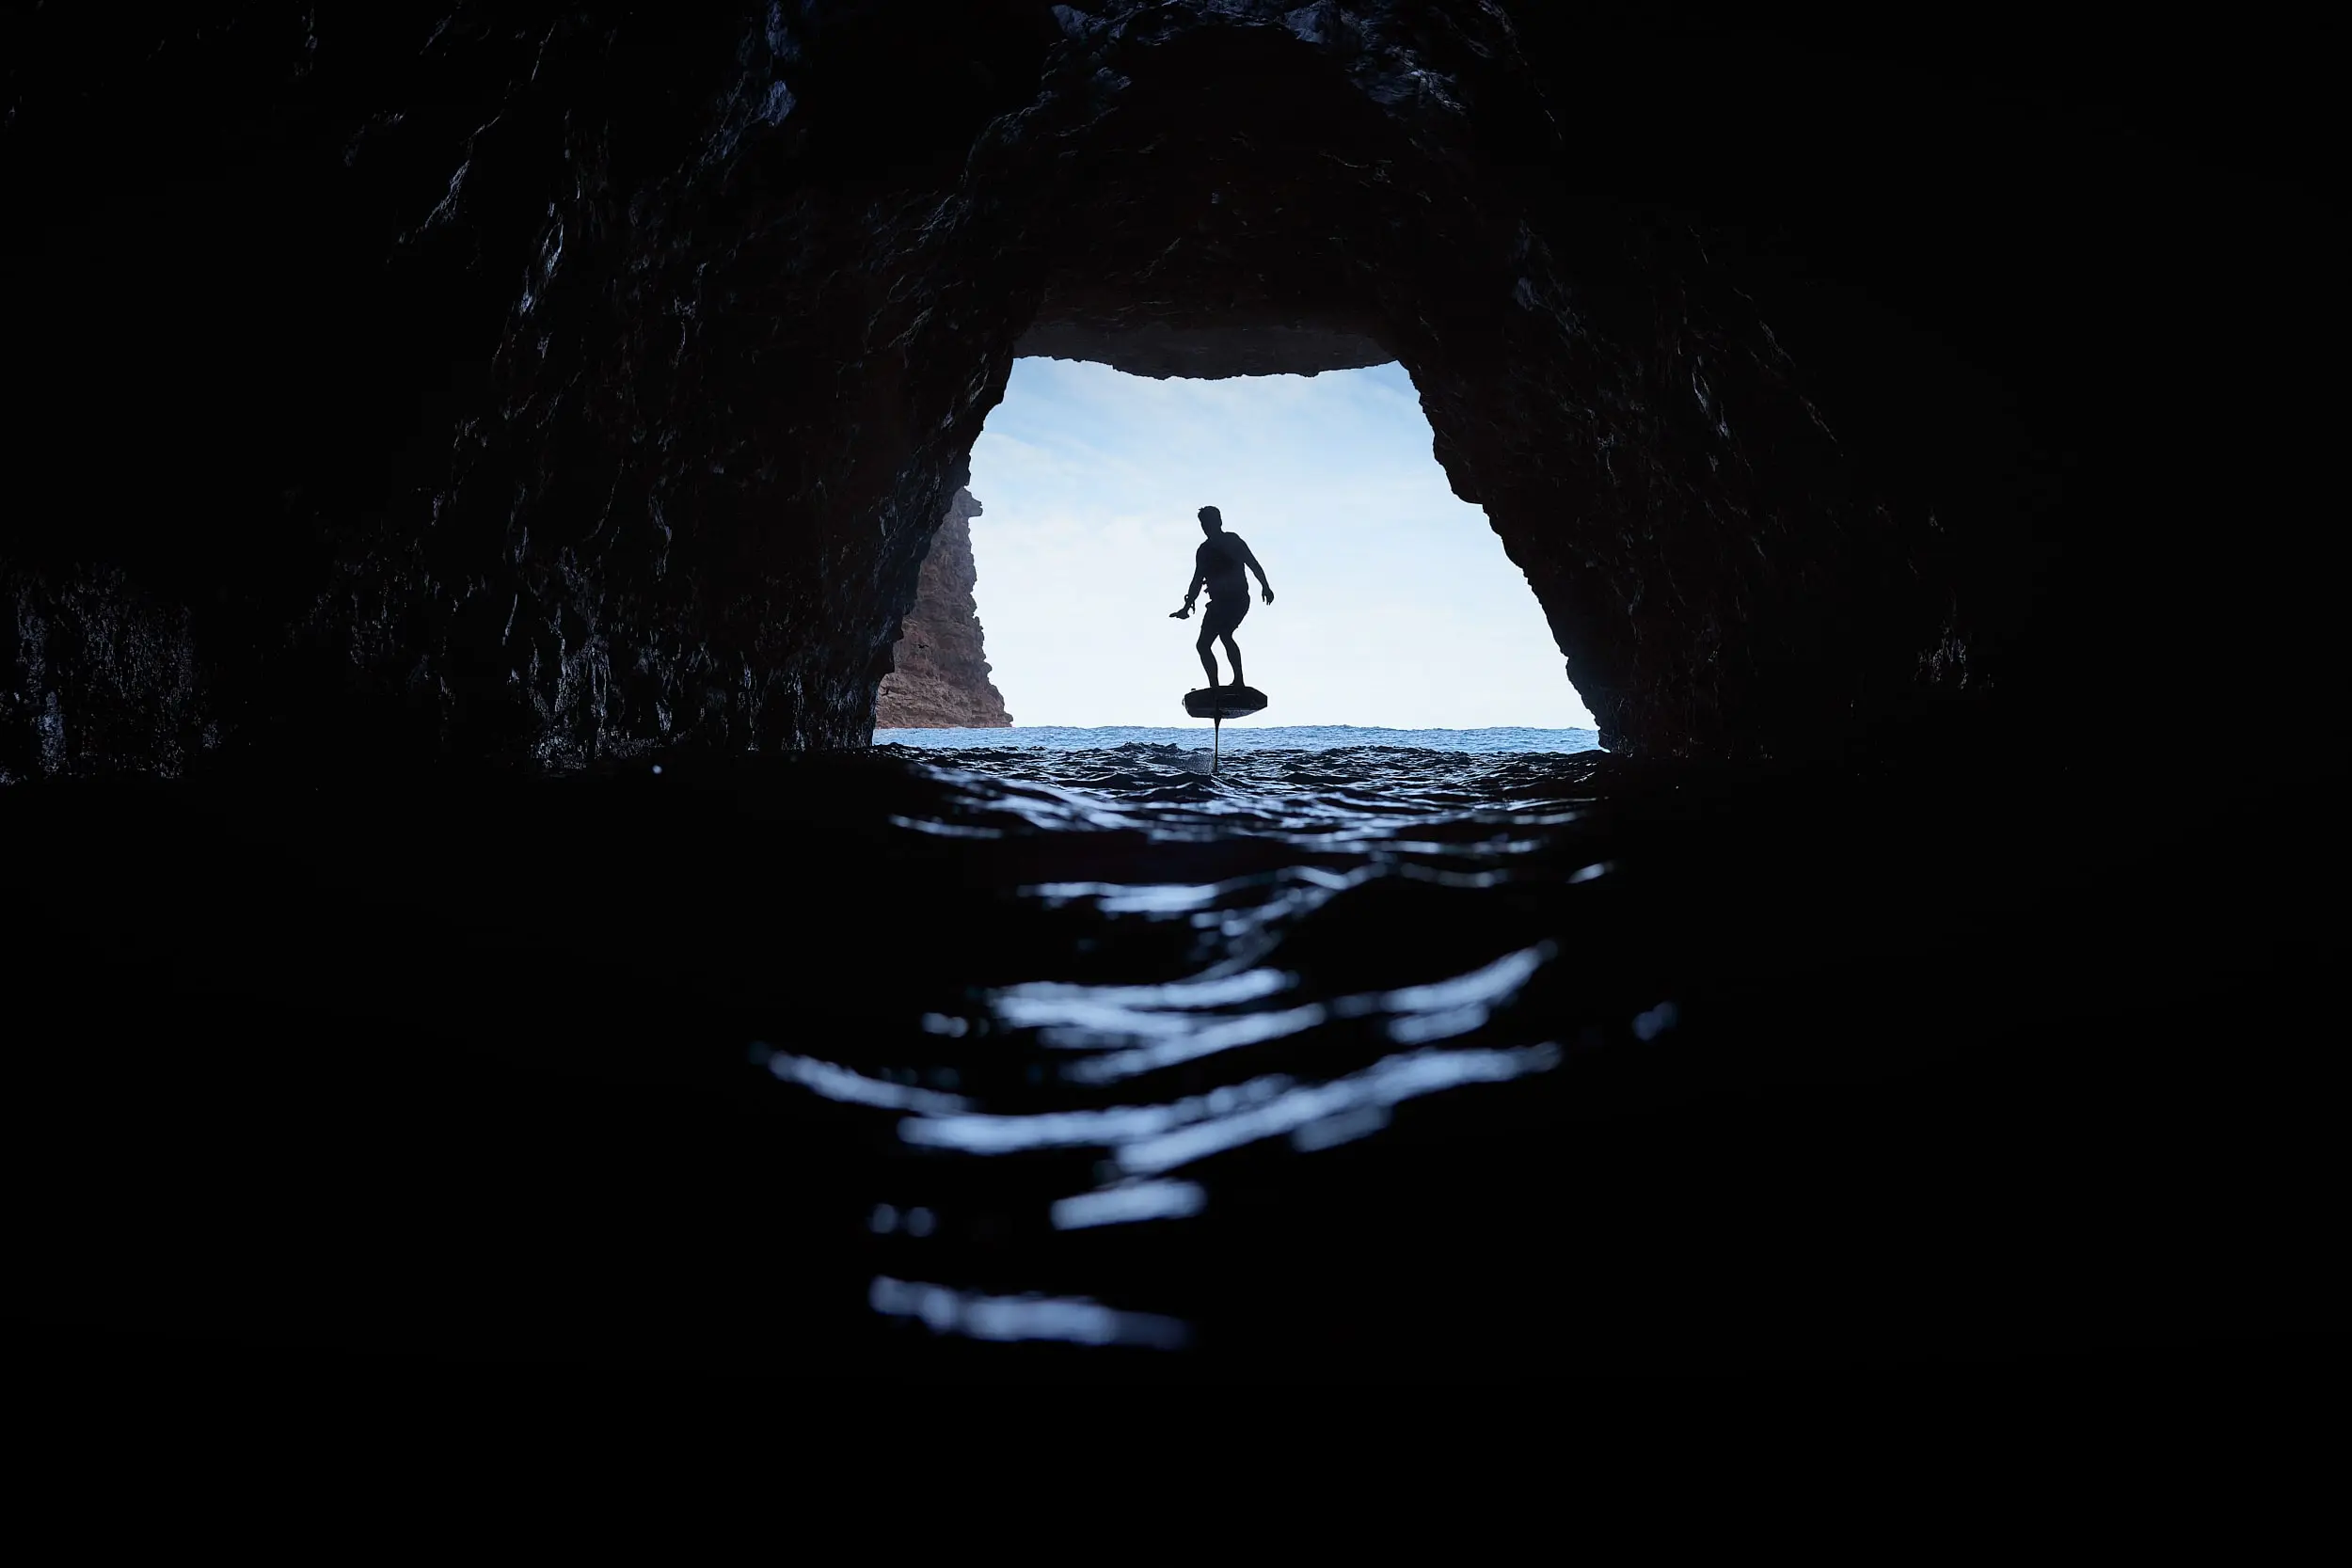 A FOIL rider cruising into a dark Hawaiian cave. The image is taken from inside the cave, and the ocean and horizon are visible in the background.